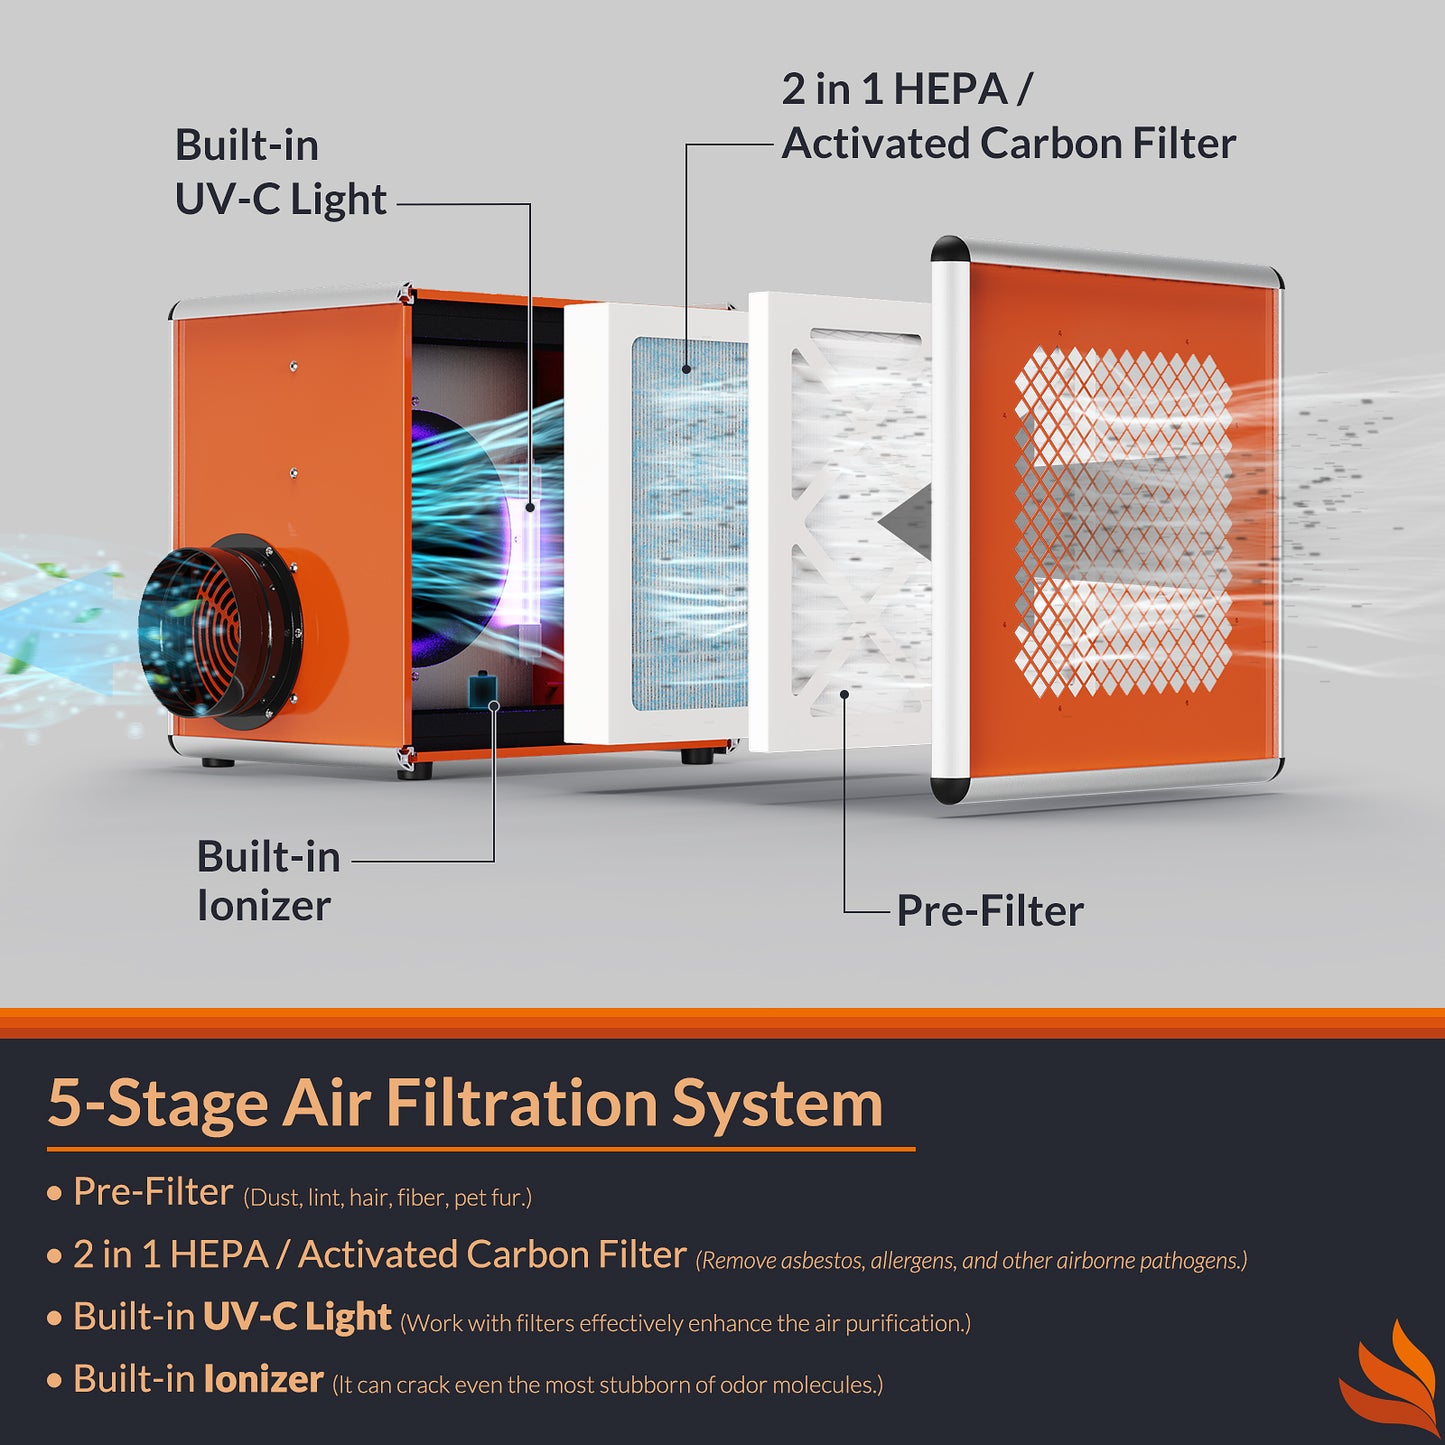 Purisystems HEPA 600 UVIG Air Scrubber with Advanced 5 Stage Filtration, Stackable Design for Hospital, Cleanroom, Water and Fire Repair